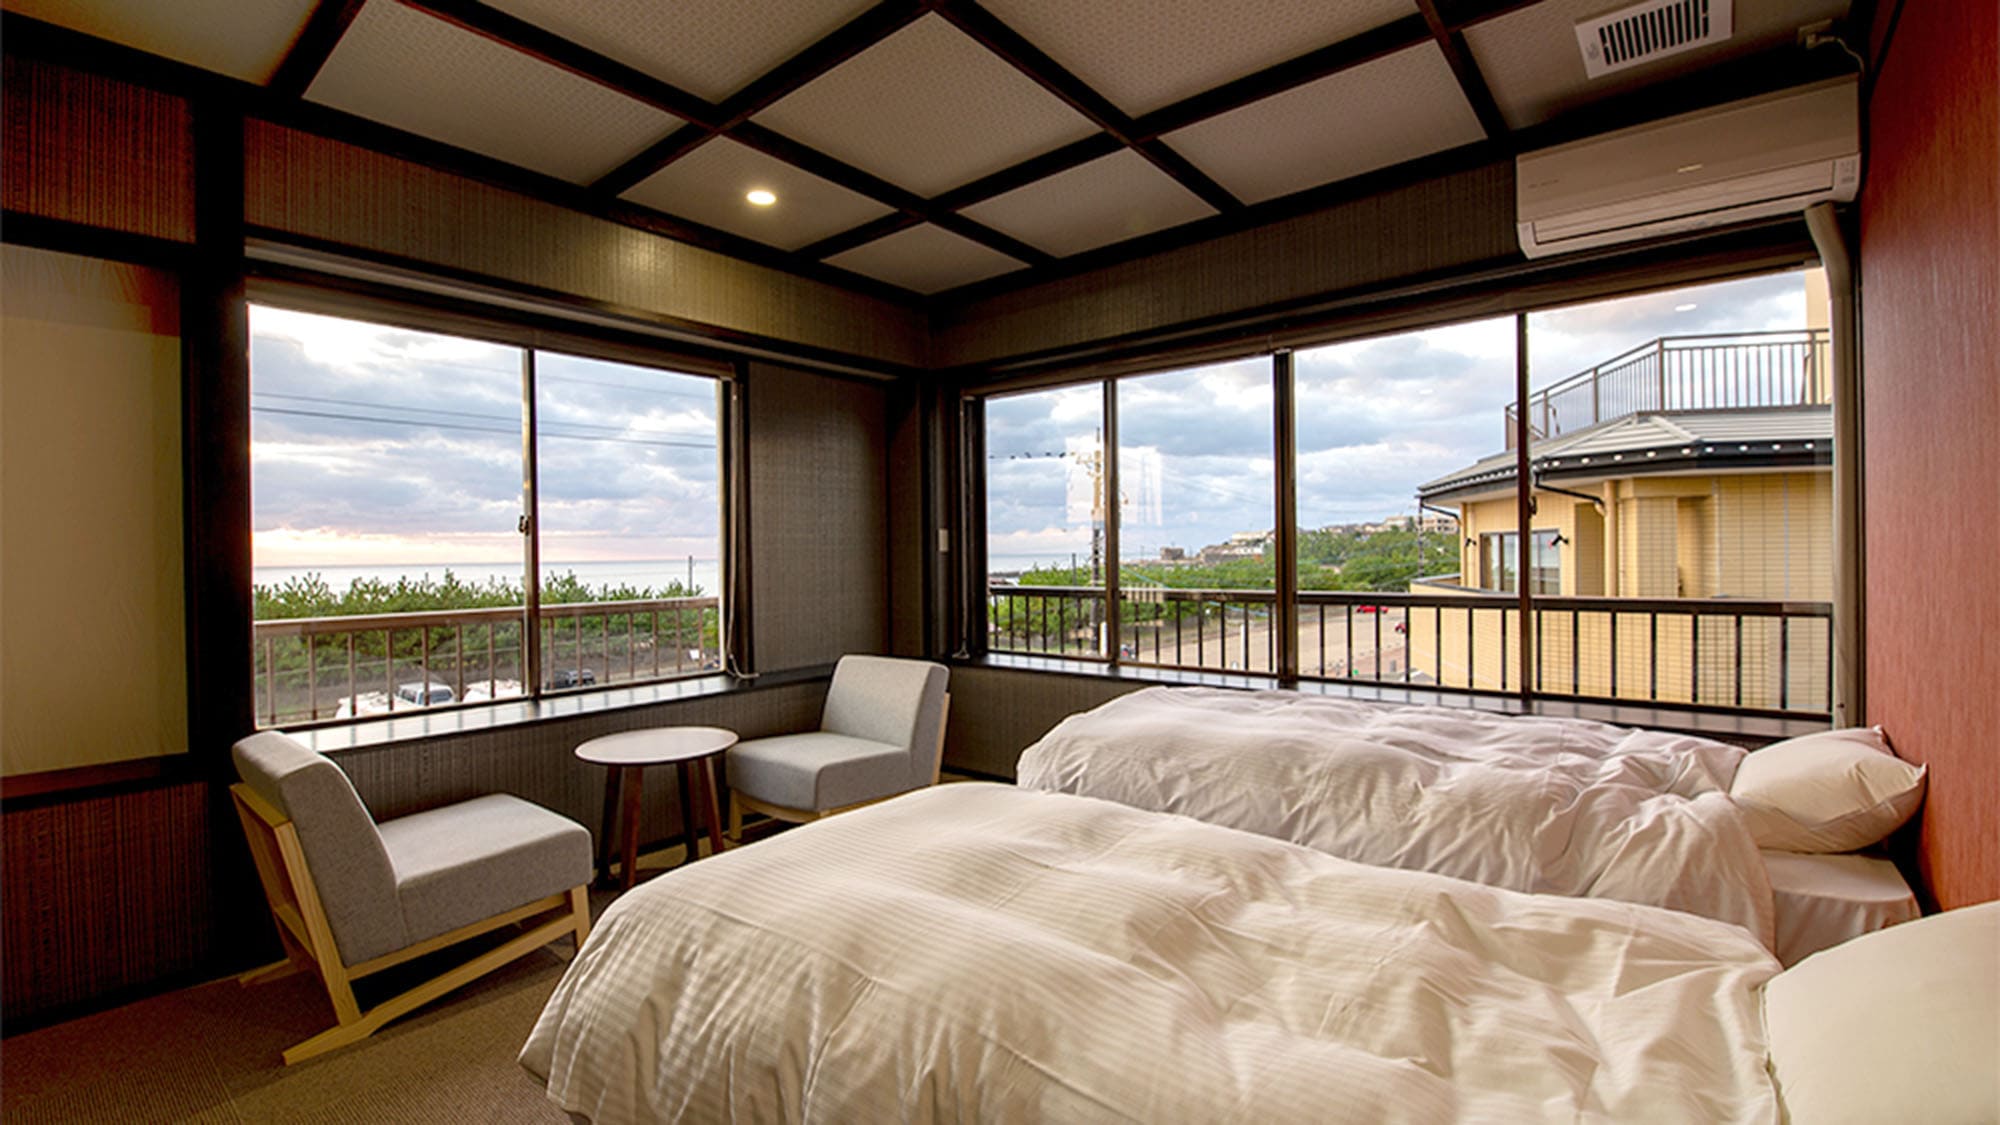 ・ A spacious and special Japanese and Western room. Take the sunset over the sea to yourself!